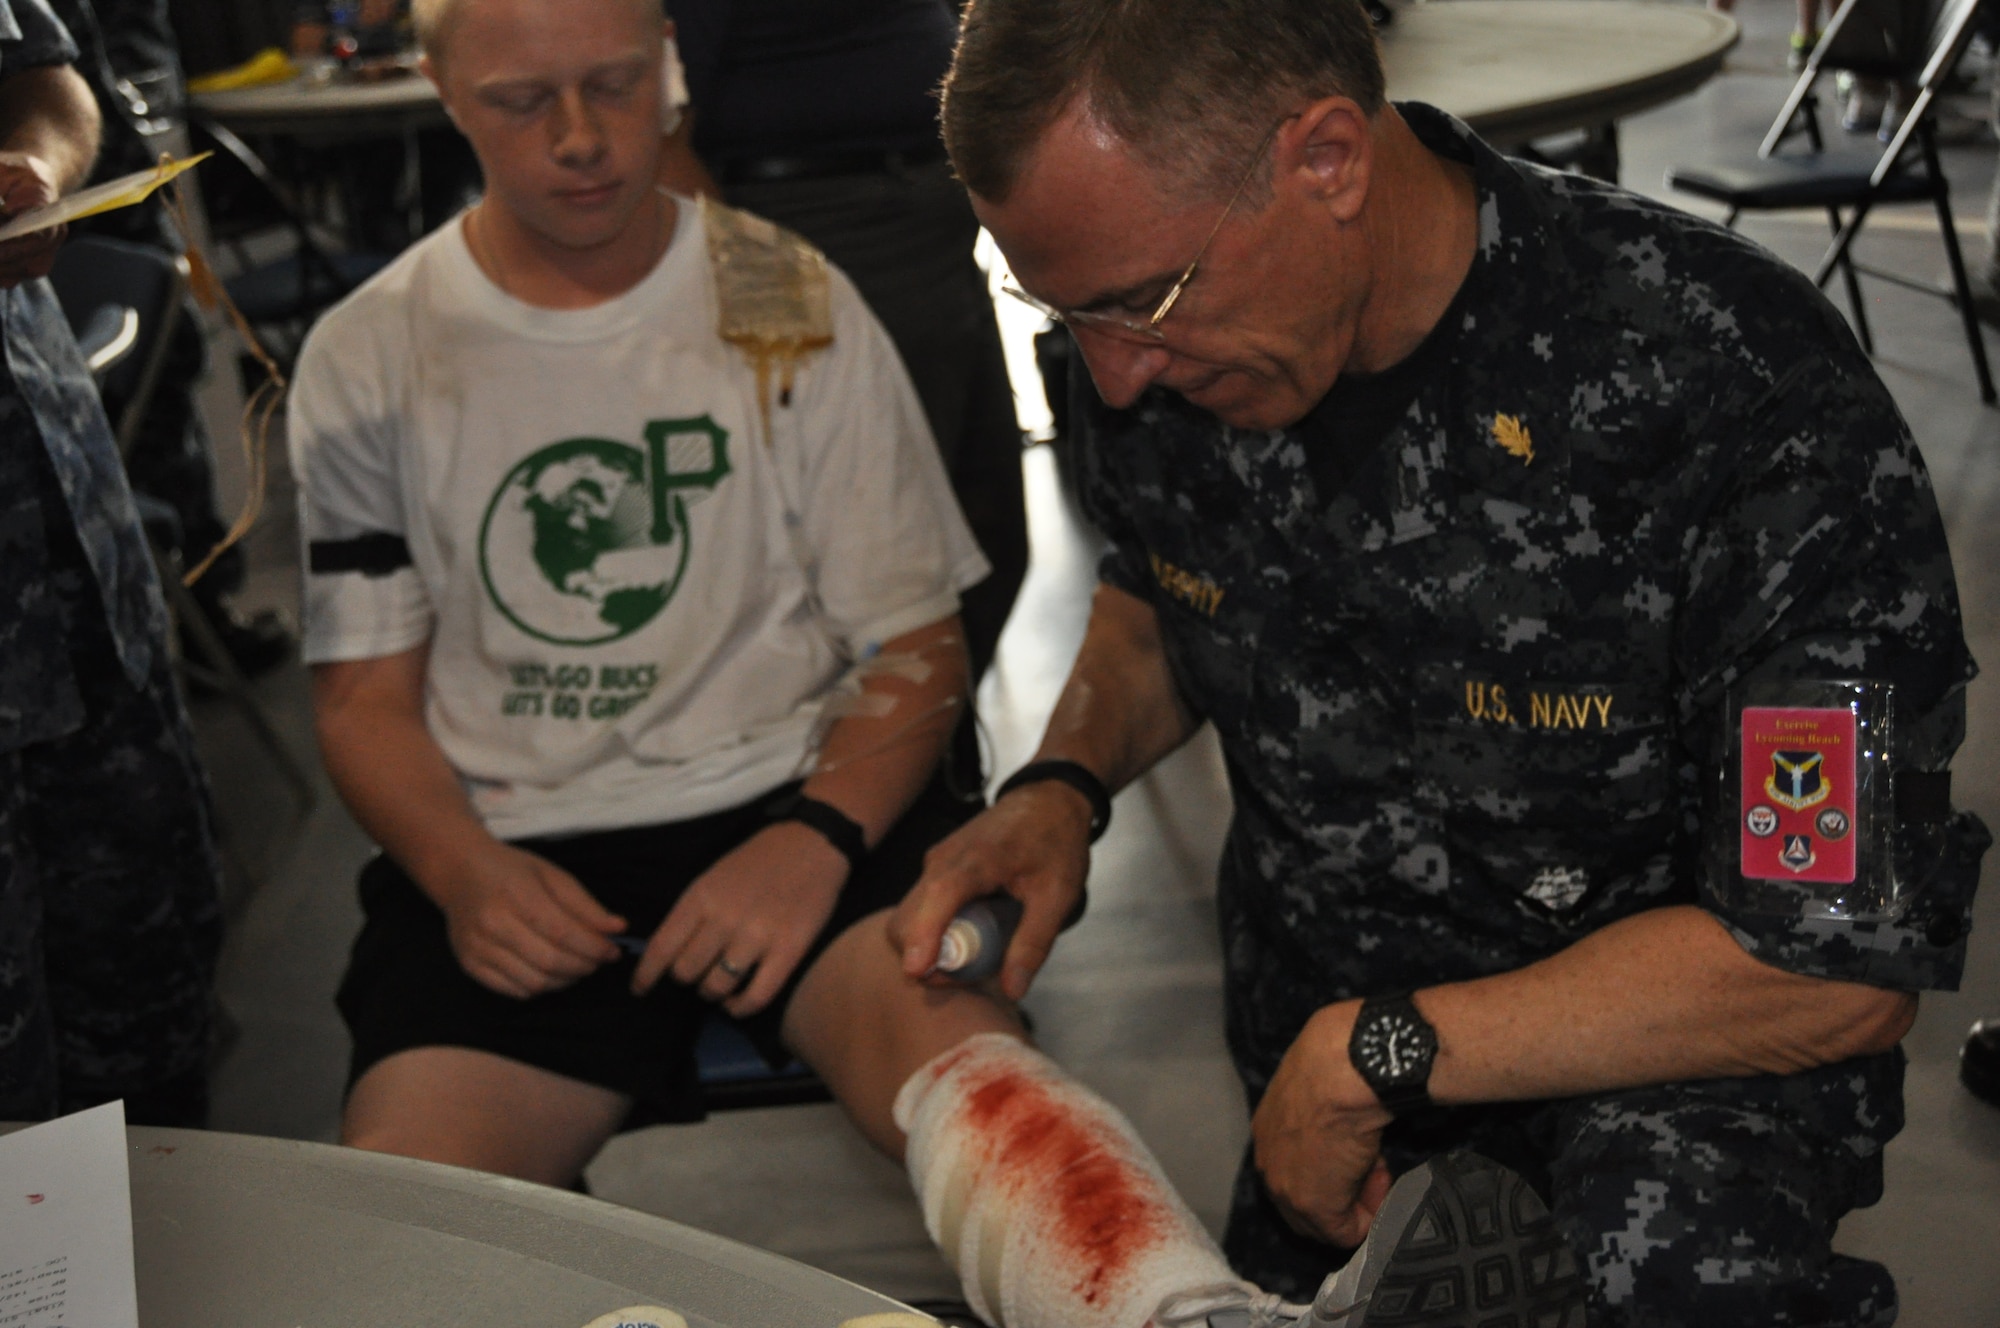 Lt. Cmdr. Tim Murphy, psychologist with the Navy Reserve Medical Service Corps at Walter Reed National Military Medical Center at Bethesda, sprays fake blood on the bandages of a Civil Air Patrol Cadet as part of preparation for a National Disaster Medical System Exercise at the Pittsburgh International Airport Air Reserve Station, July 12, 2014. (U.S. Air Force photo by Senior Airman Marjorie A. Bowlden)